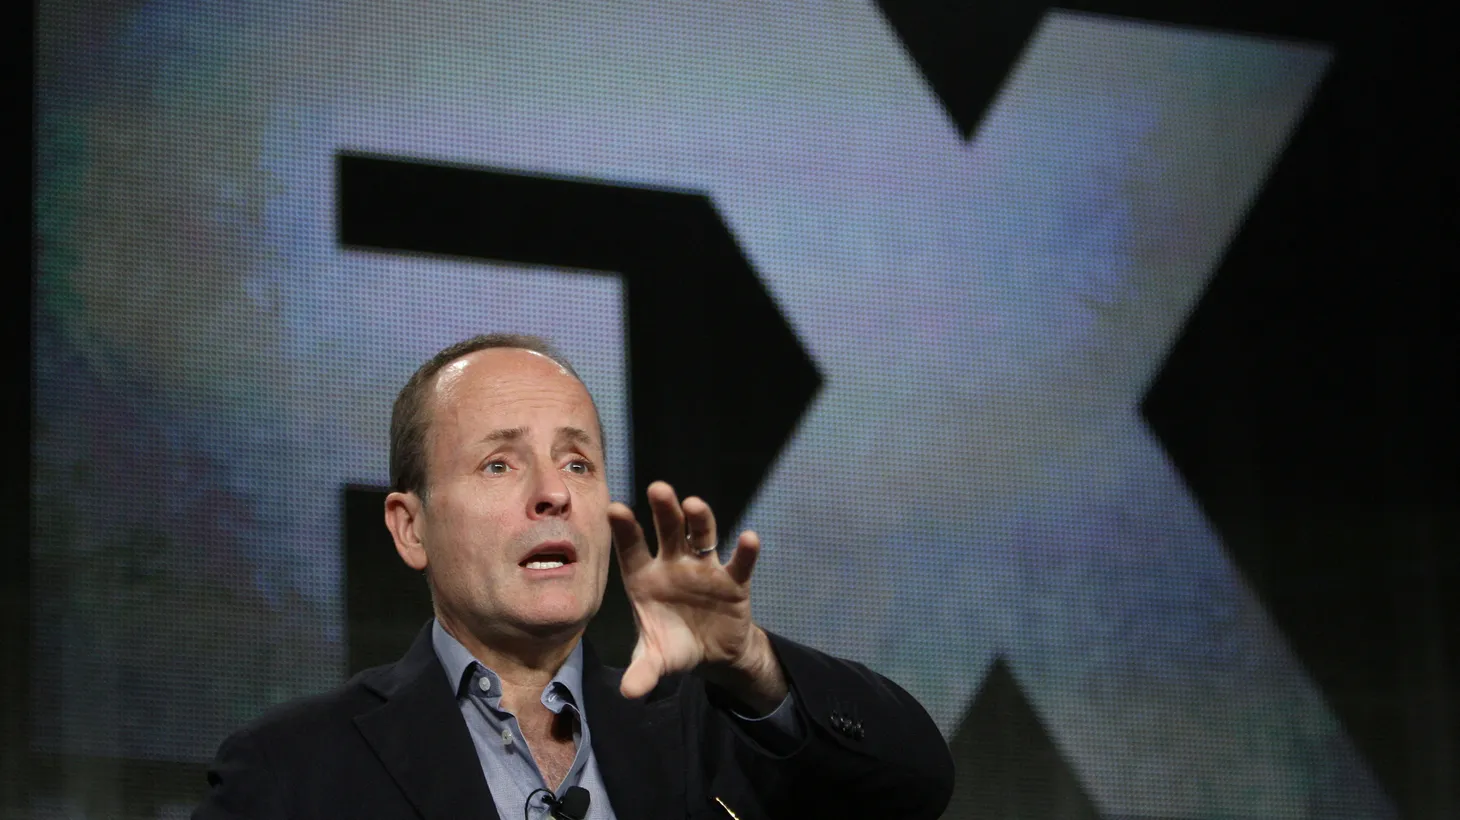 FX head John Landgraf says that peak TV is over. But what does that really mean?